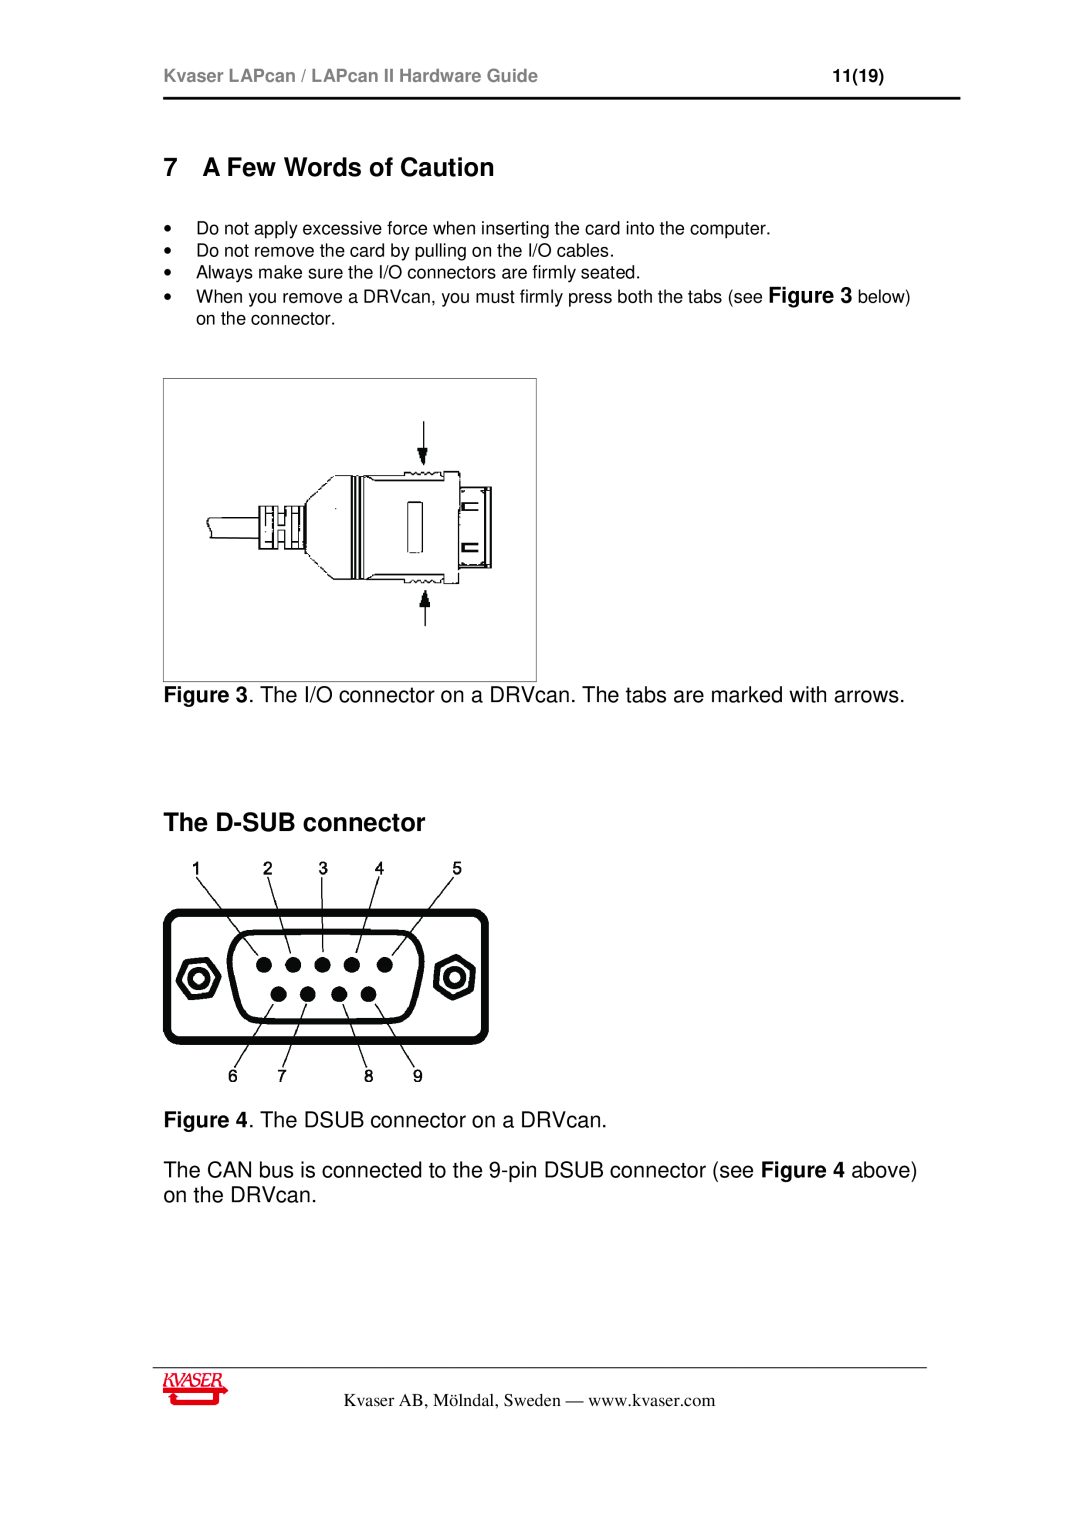 Philips Kvaser LAPcan II manual A Few Words of Caution, The D-SUBconnector 